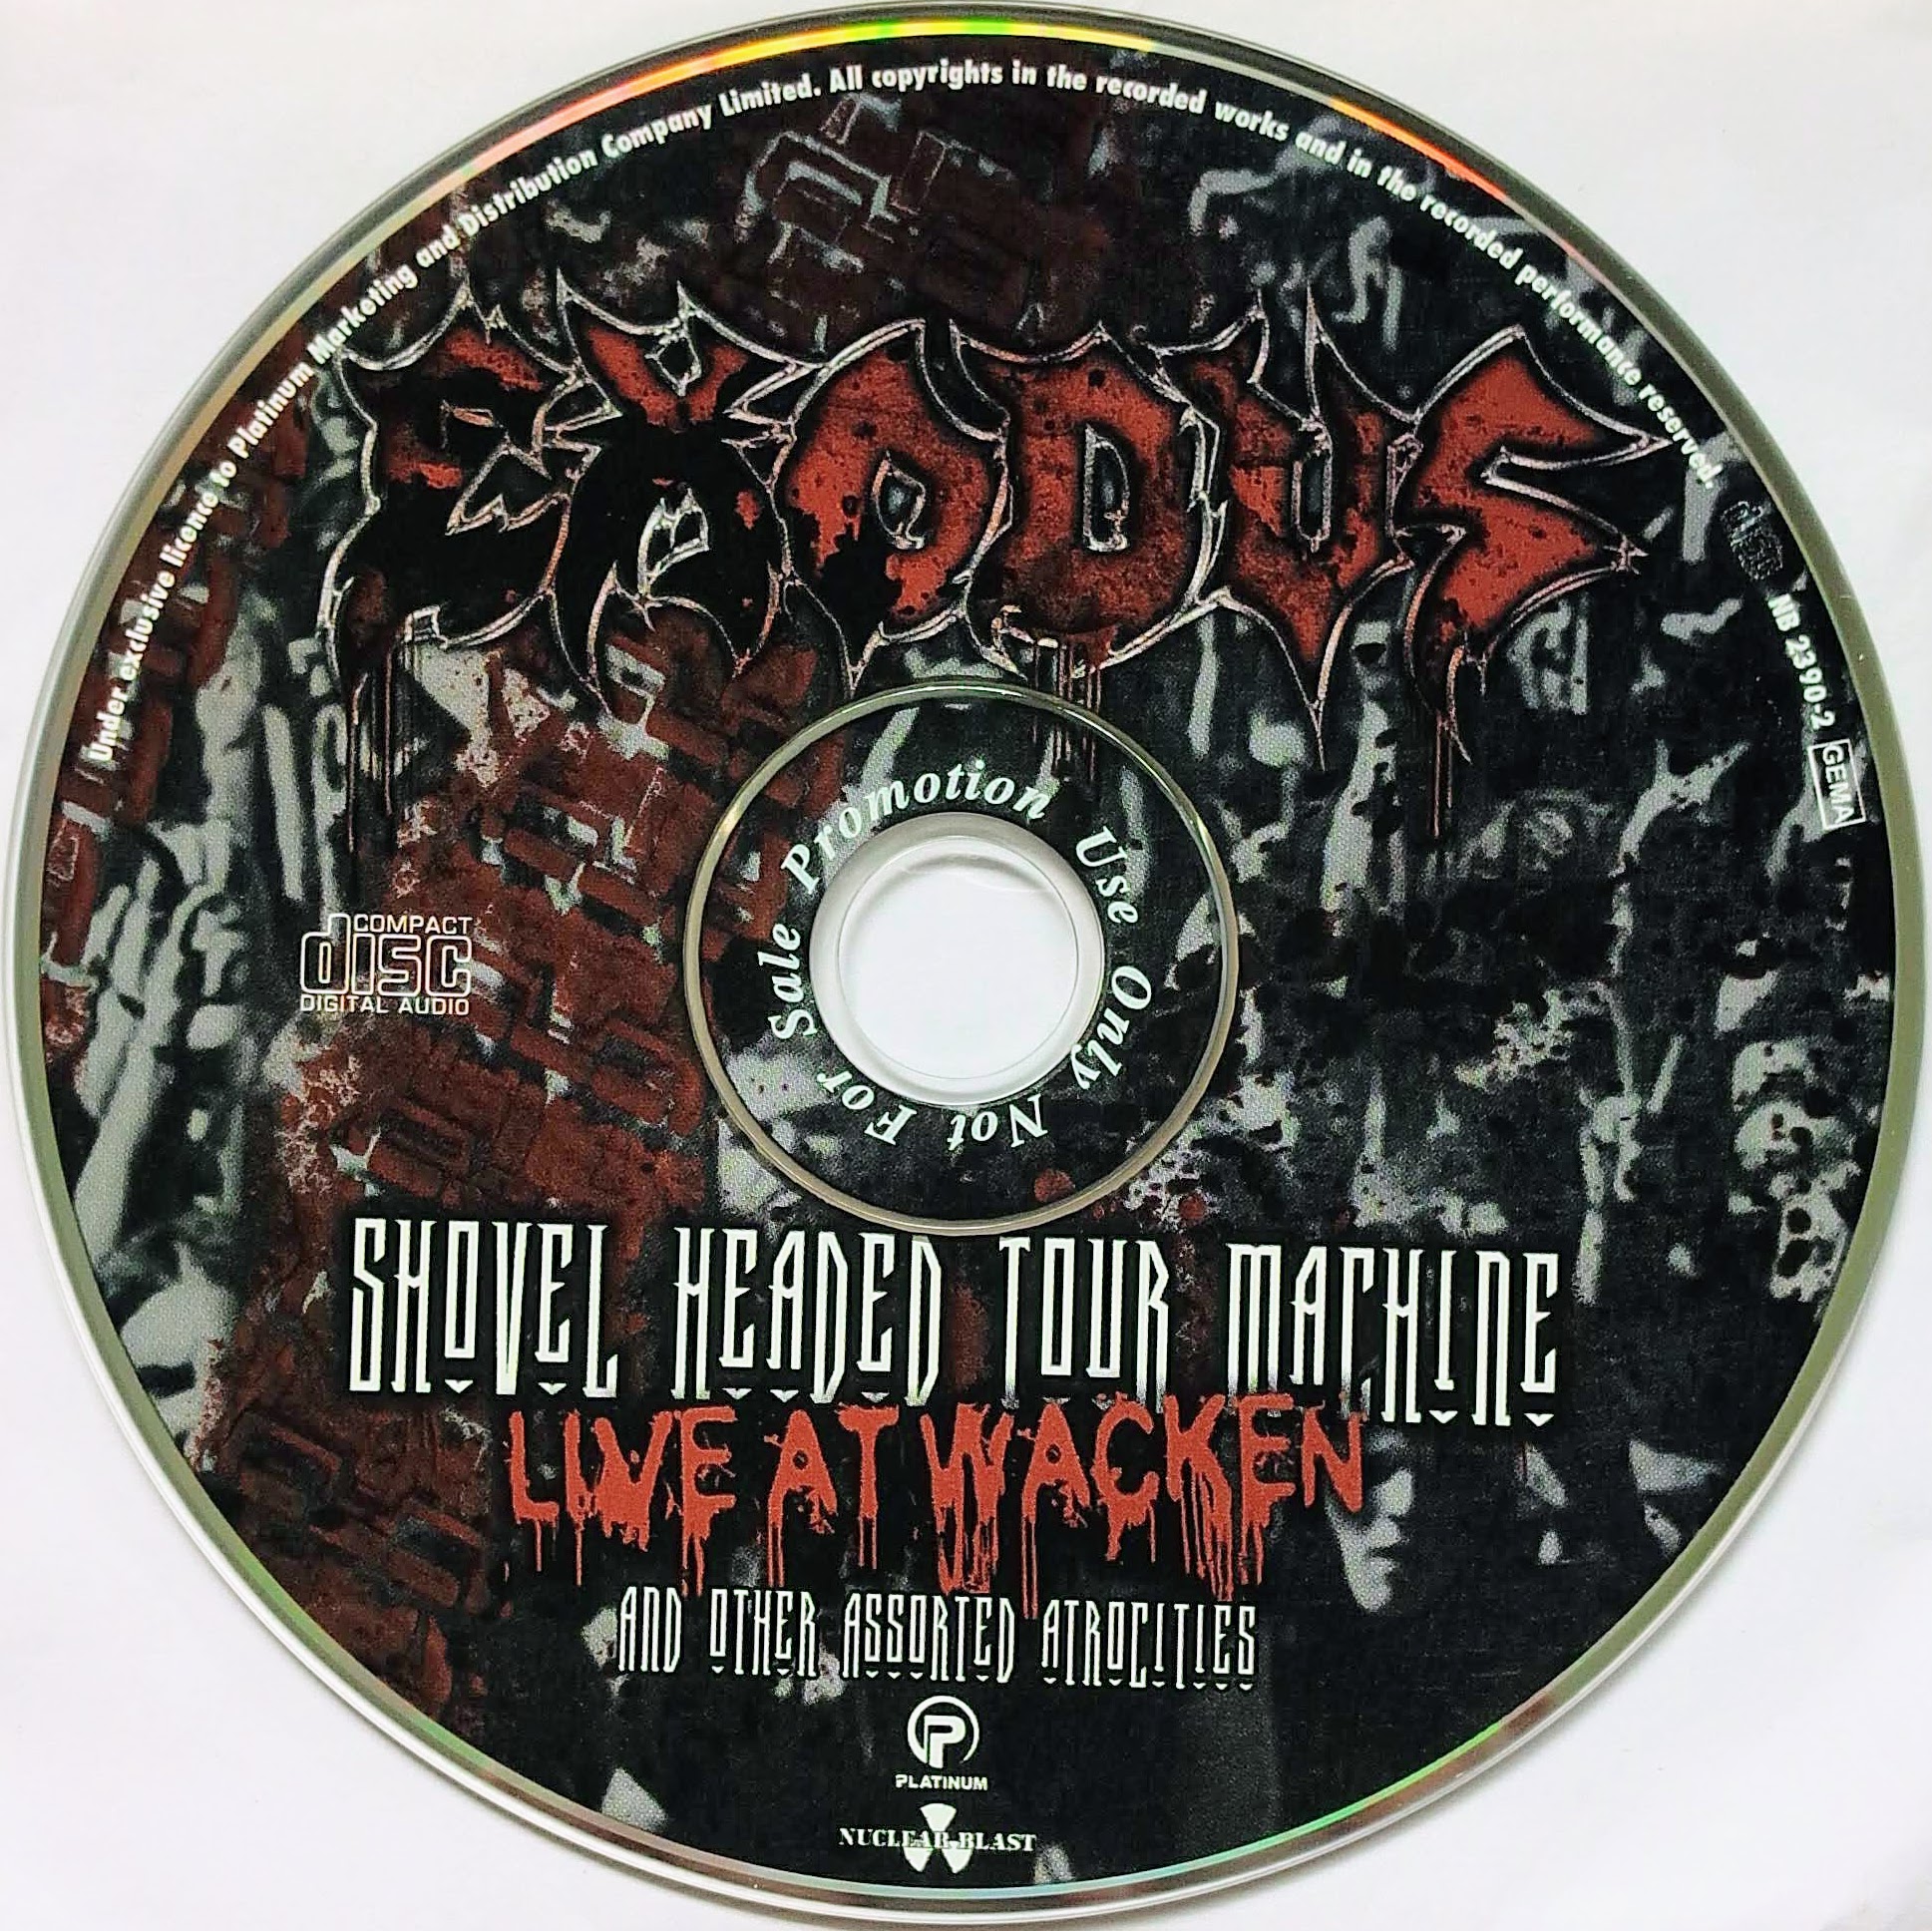 CD (Promotion) Exodus - Shovel Headed Tour Machine [Live At Wacken And Other Assorted Atrocities] (CD Only)